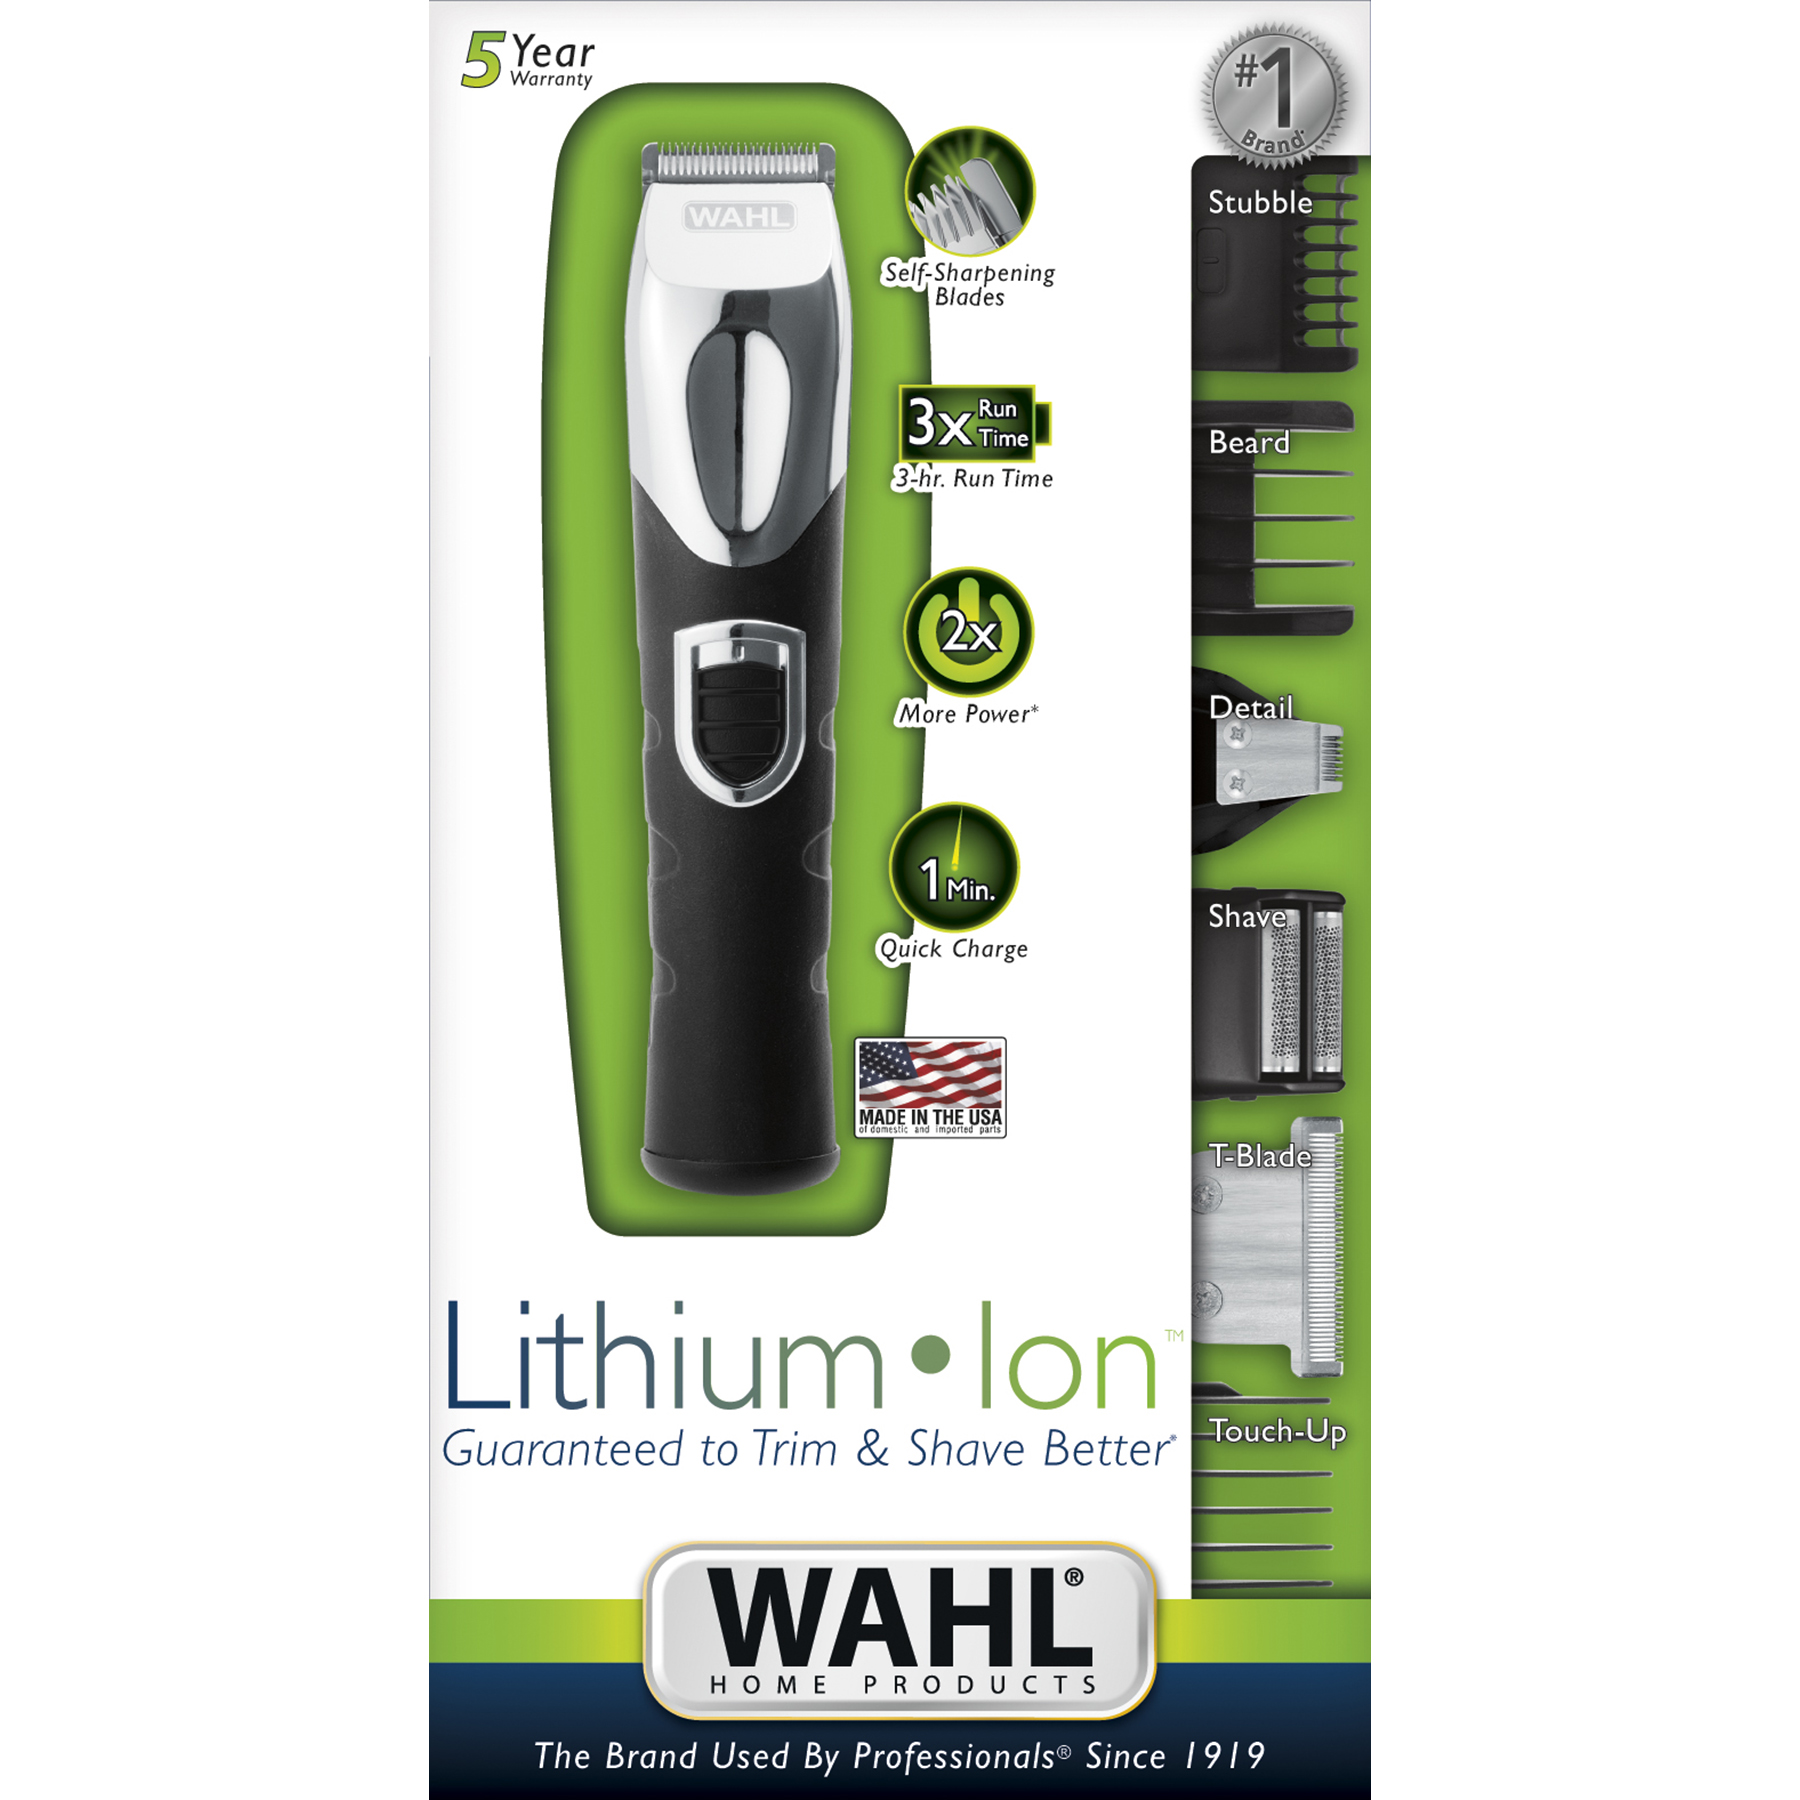 wahl lithium ion all in one trimmer review